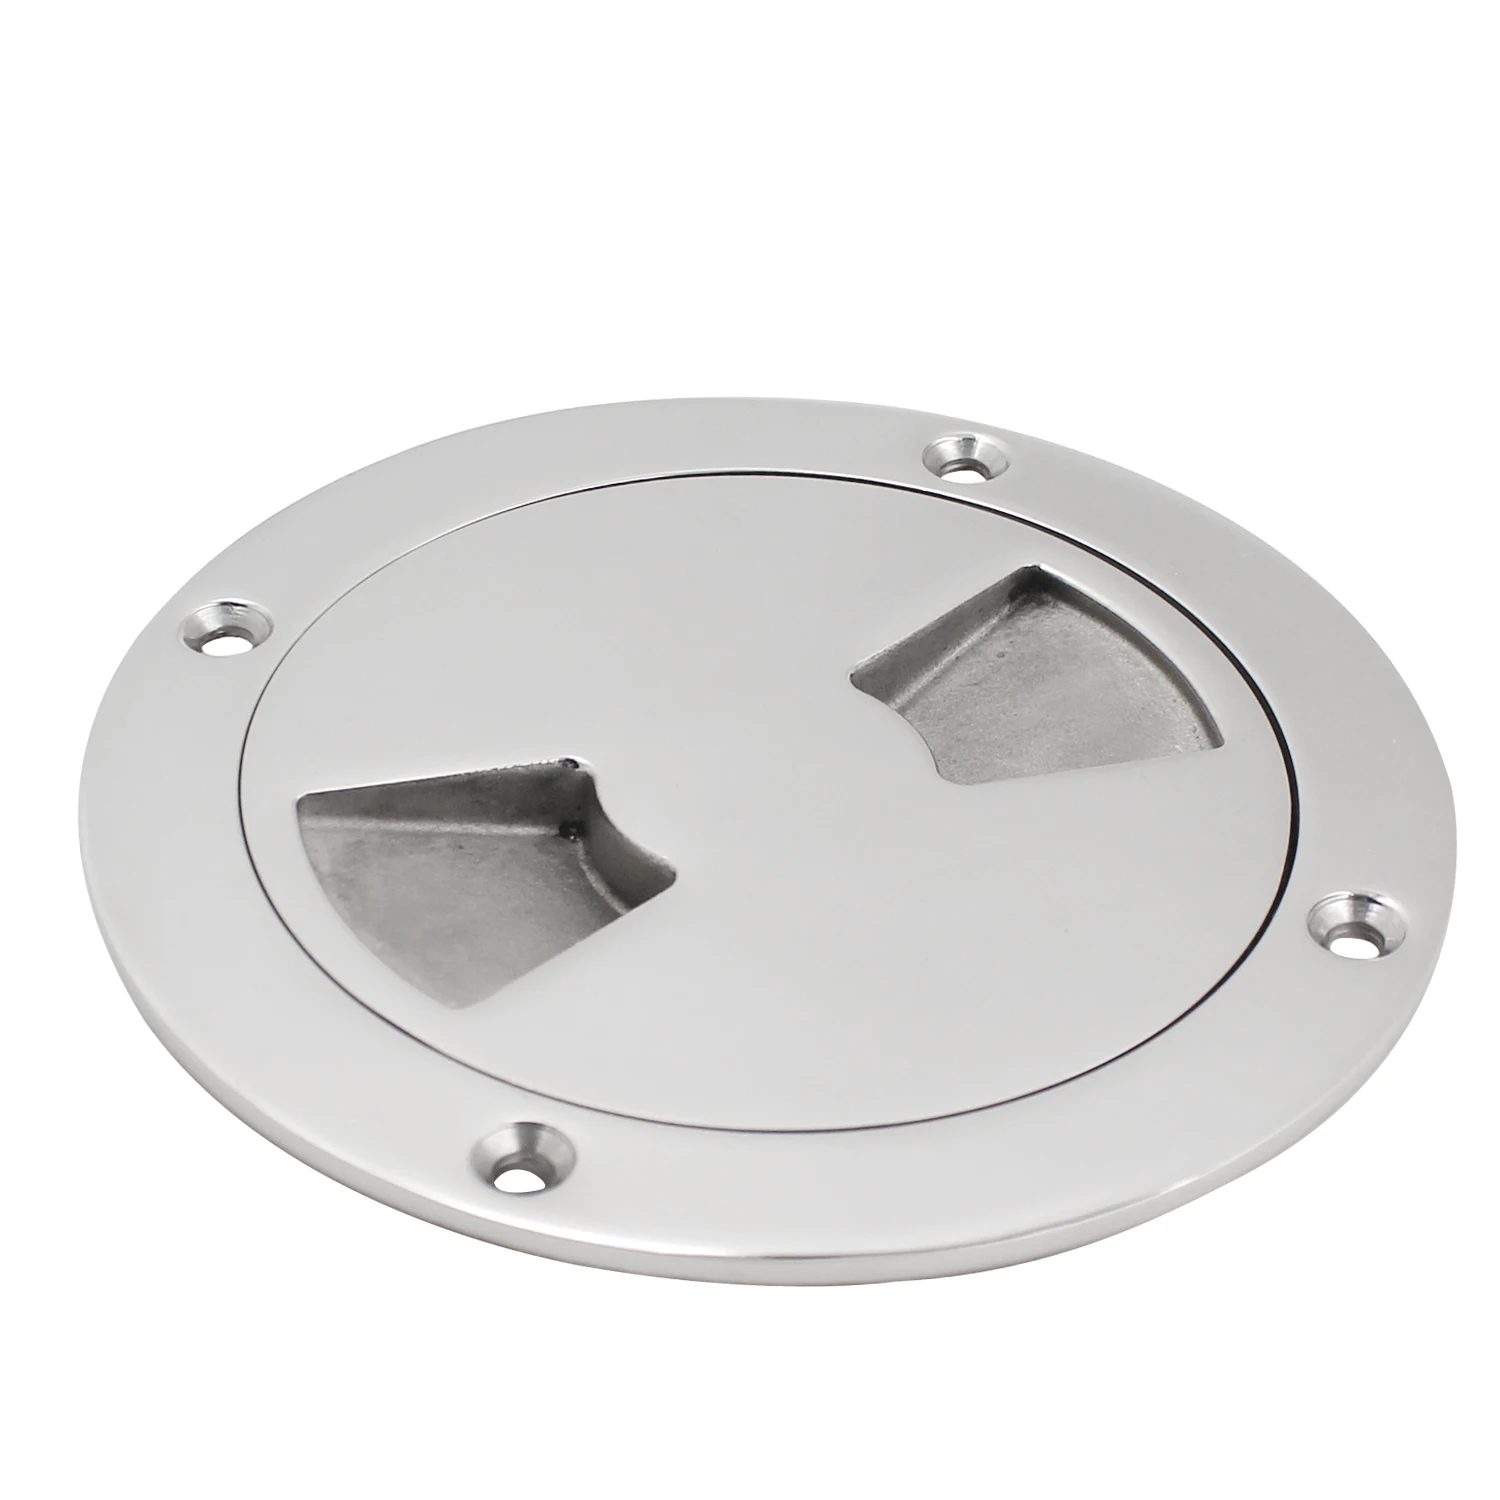 3 inch Round Deck Inspection Access Hatch Cover Boat Screw Out Deck Inspection Plate For Yacht Marine